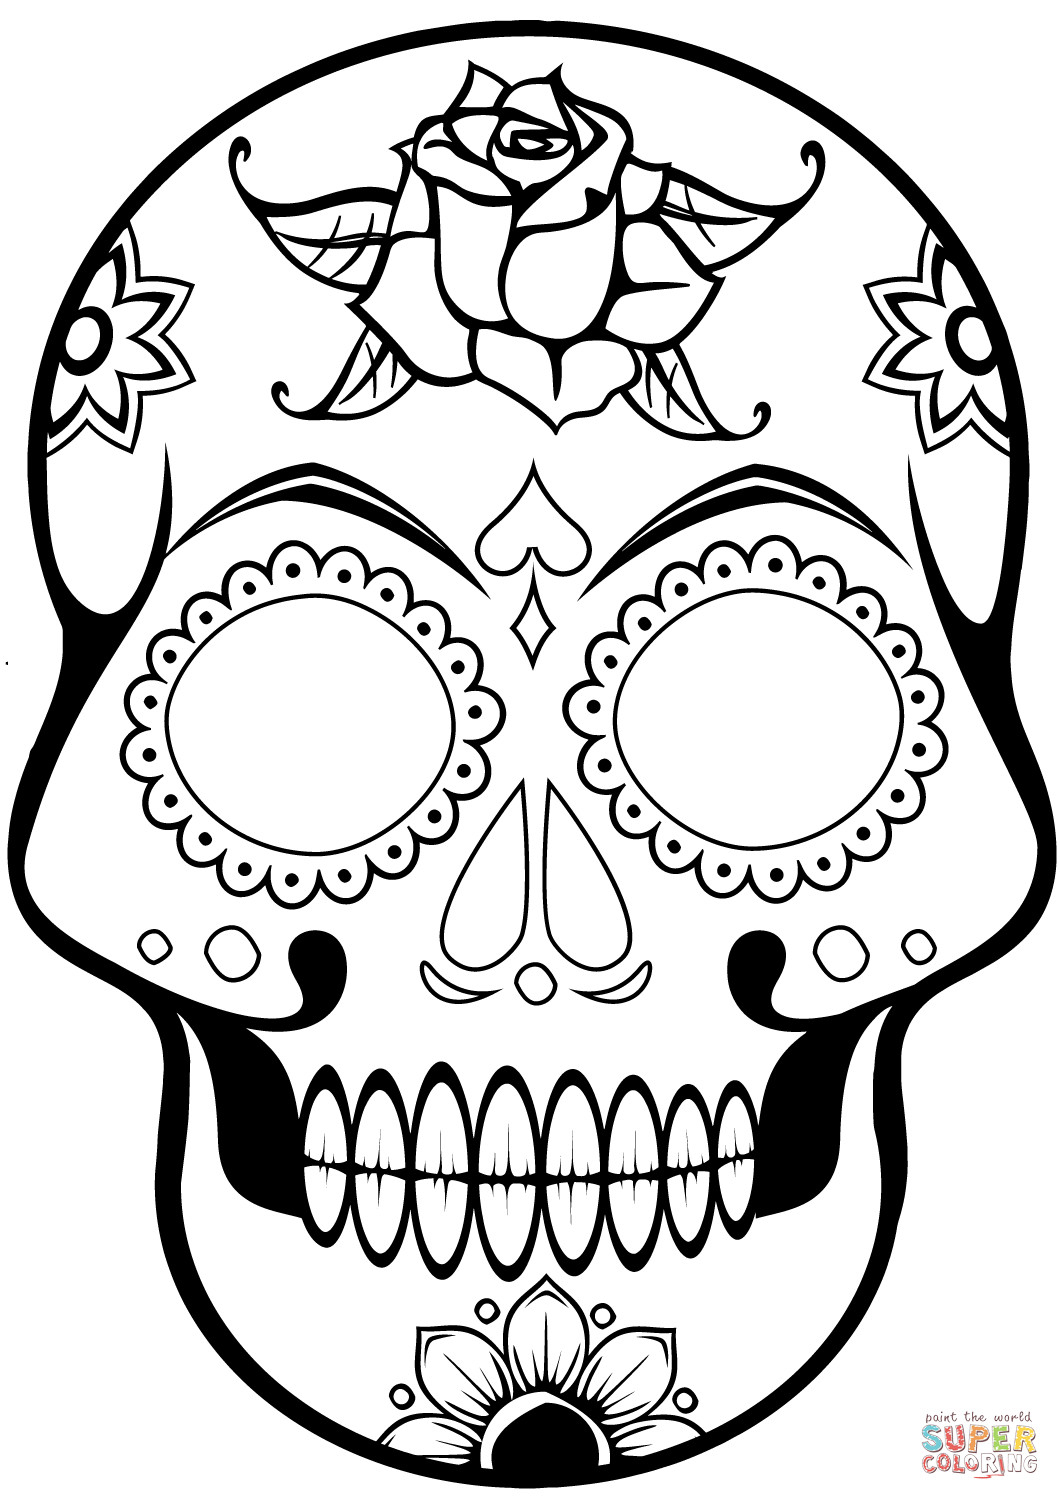 Coloring Pages : Free Printable Sugar Skulling Pages For Kids Sugar - Free Printable Sugar Skull Coloring Pages